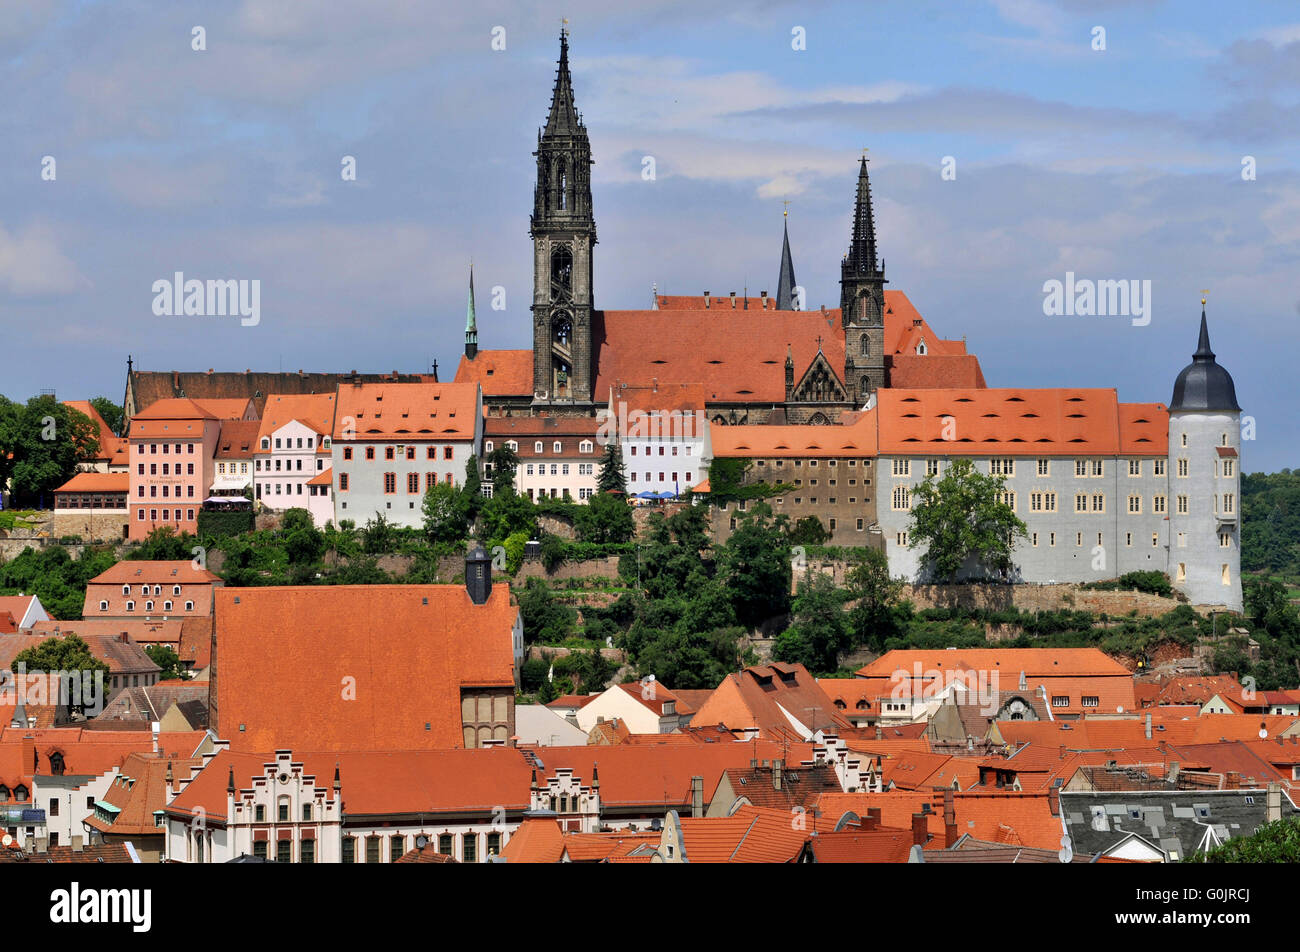 Meissner Dom, cathedral church, Albrechtsburg, Domberg, old town, Meissen, Saxony, Germany / Meissen Cathedral Stock Photo